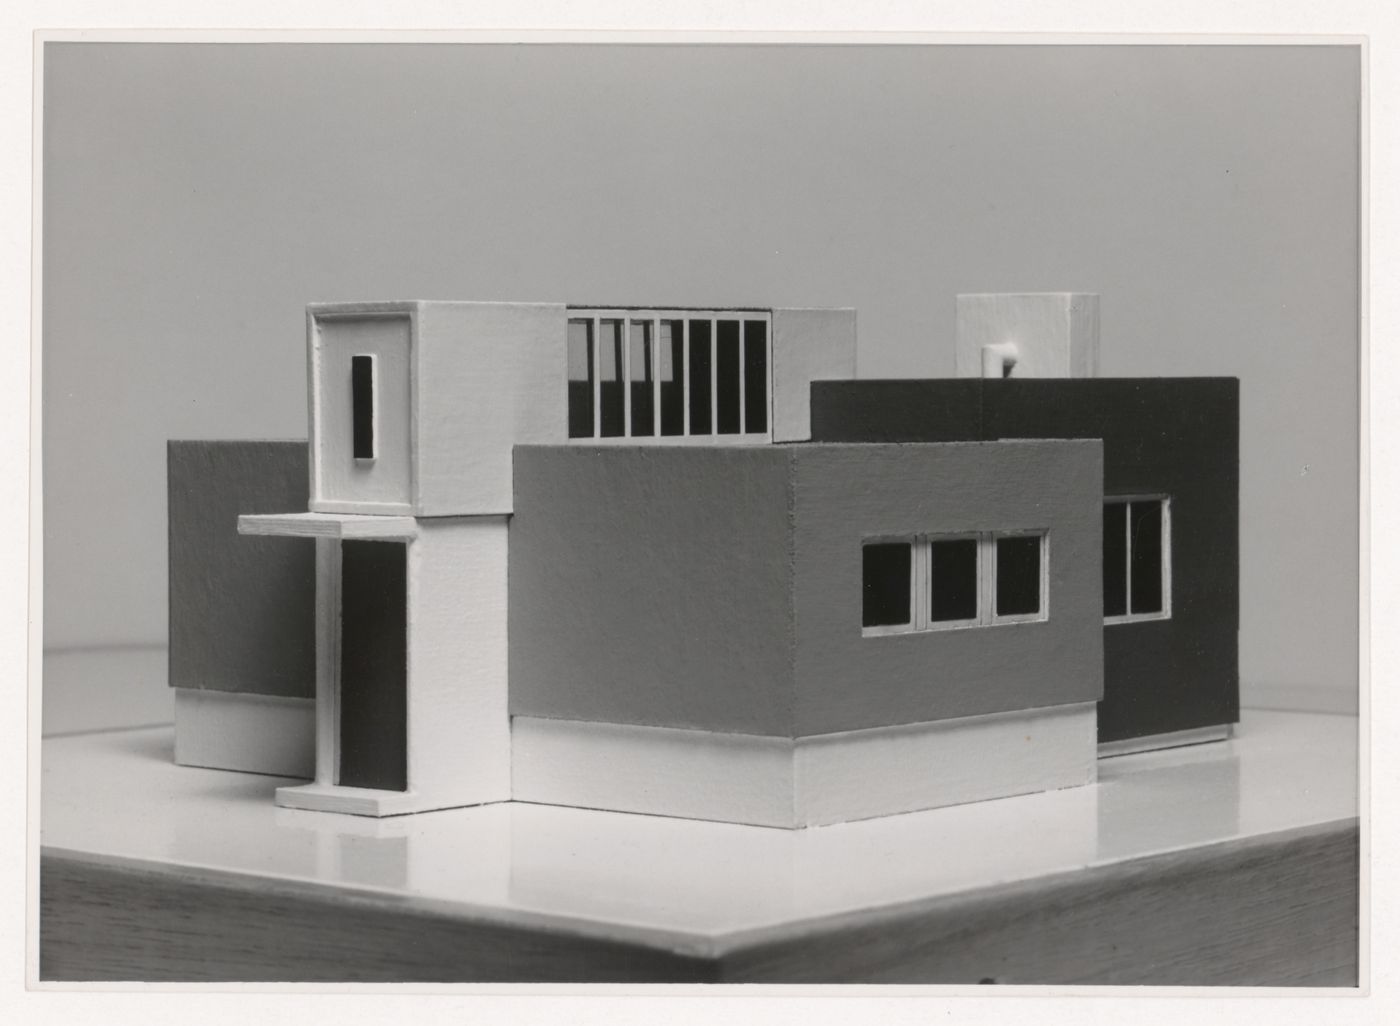 Photograph of a model for a temporary construction administration building, Oud-Mathenesse Quarter, Rotterdam, Netherlands